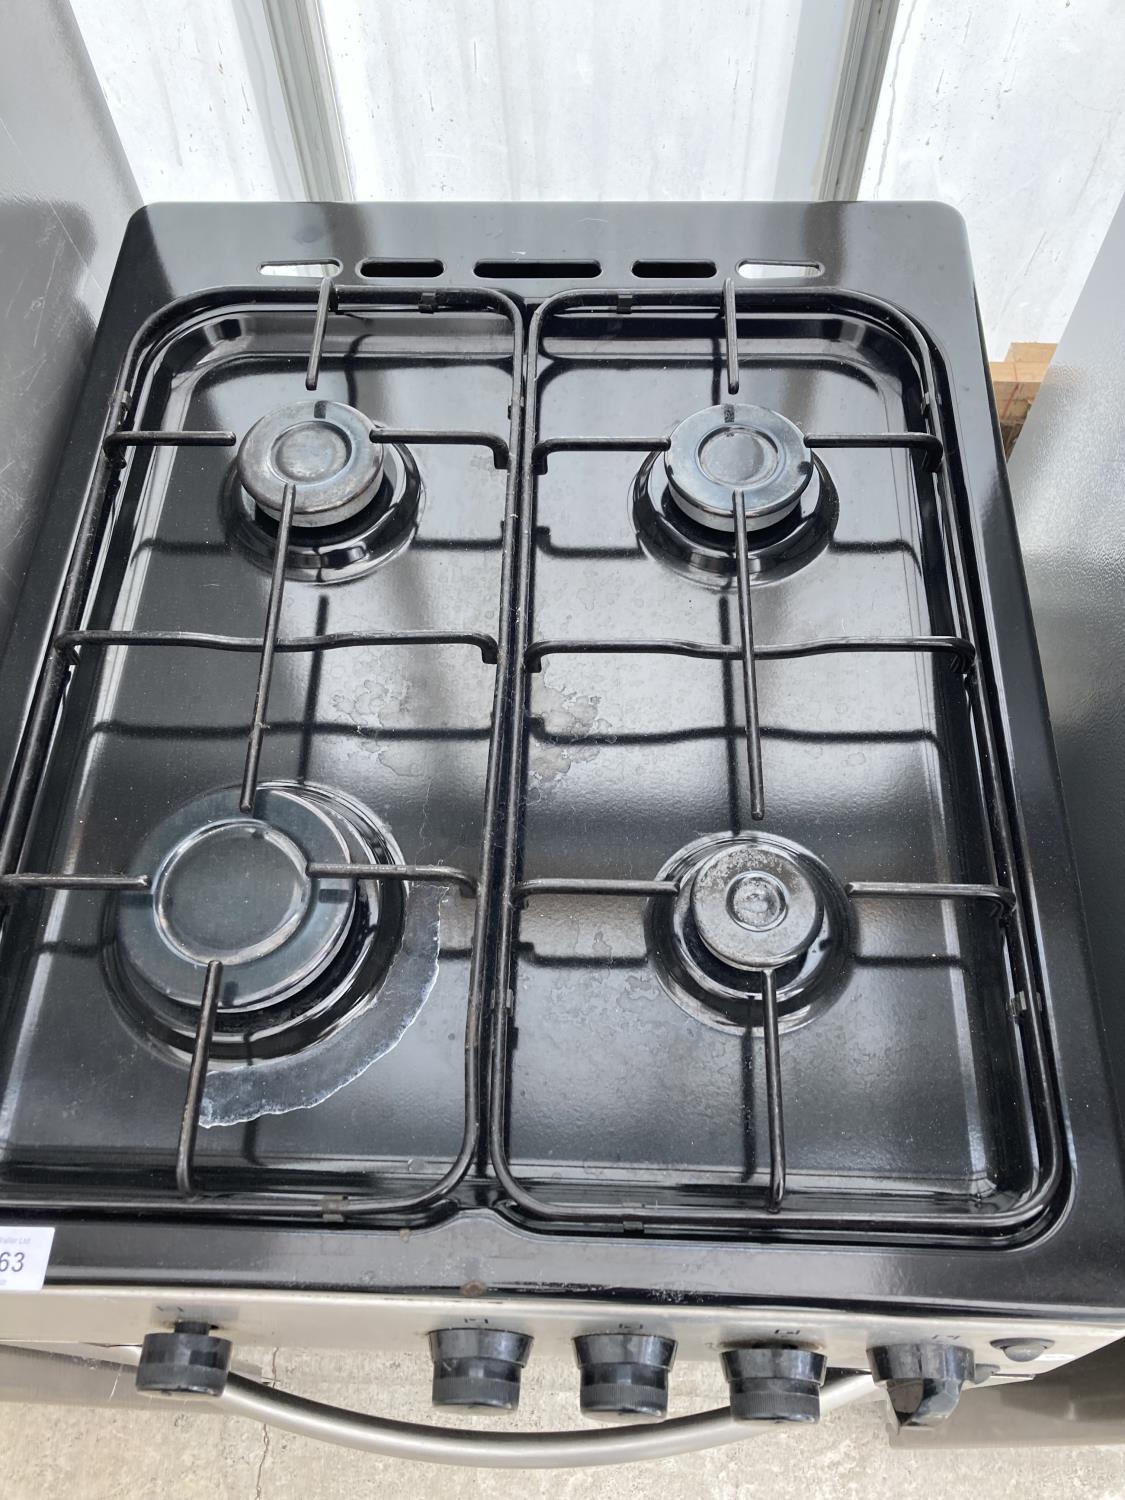 A SILVER AND BLACK ELECTRIC AND GAS OVEN AND HOB - Image 2 of 3